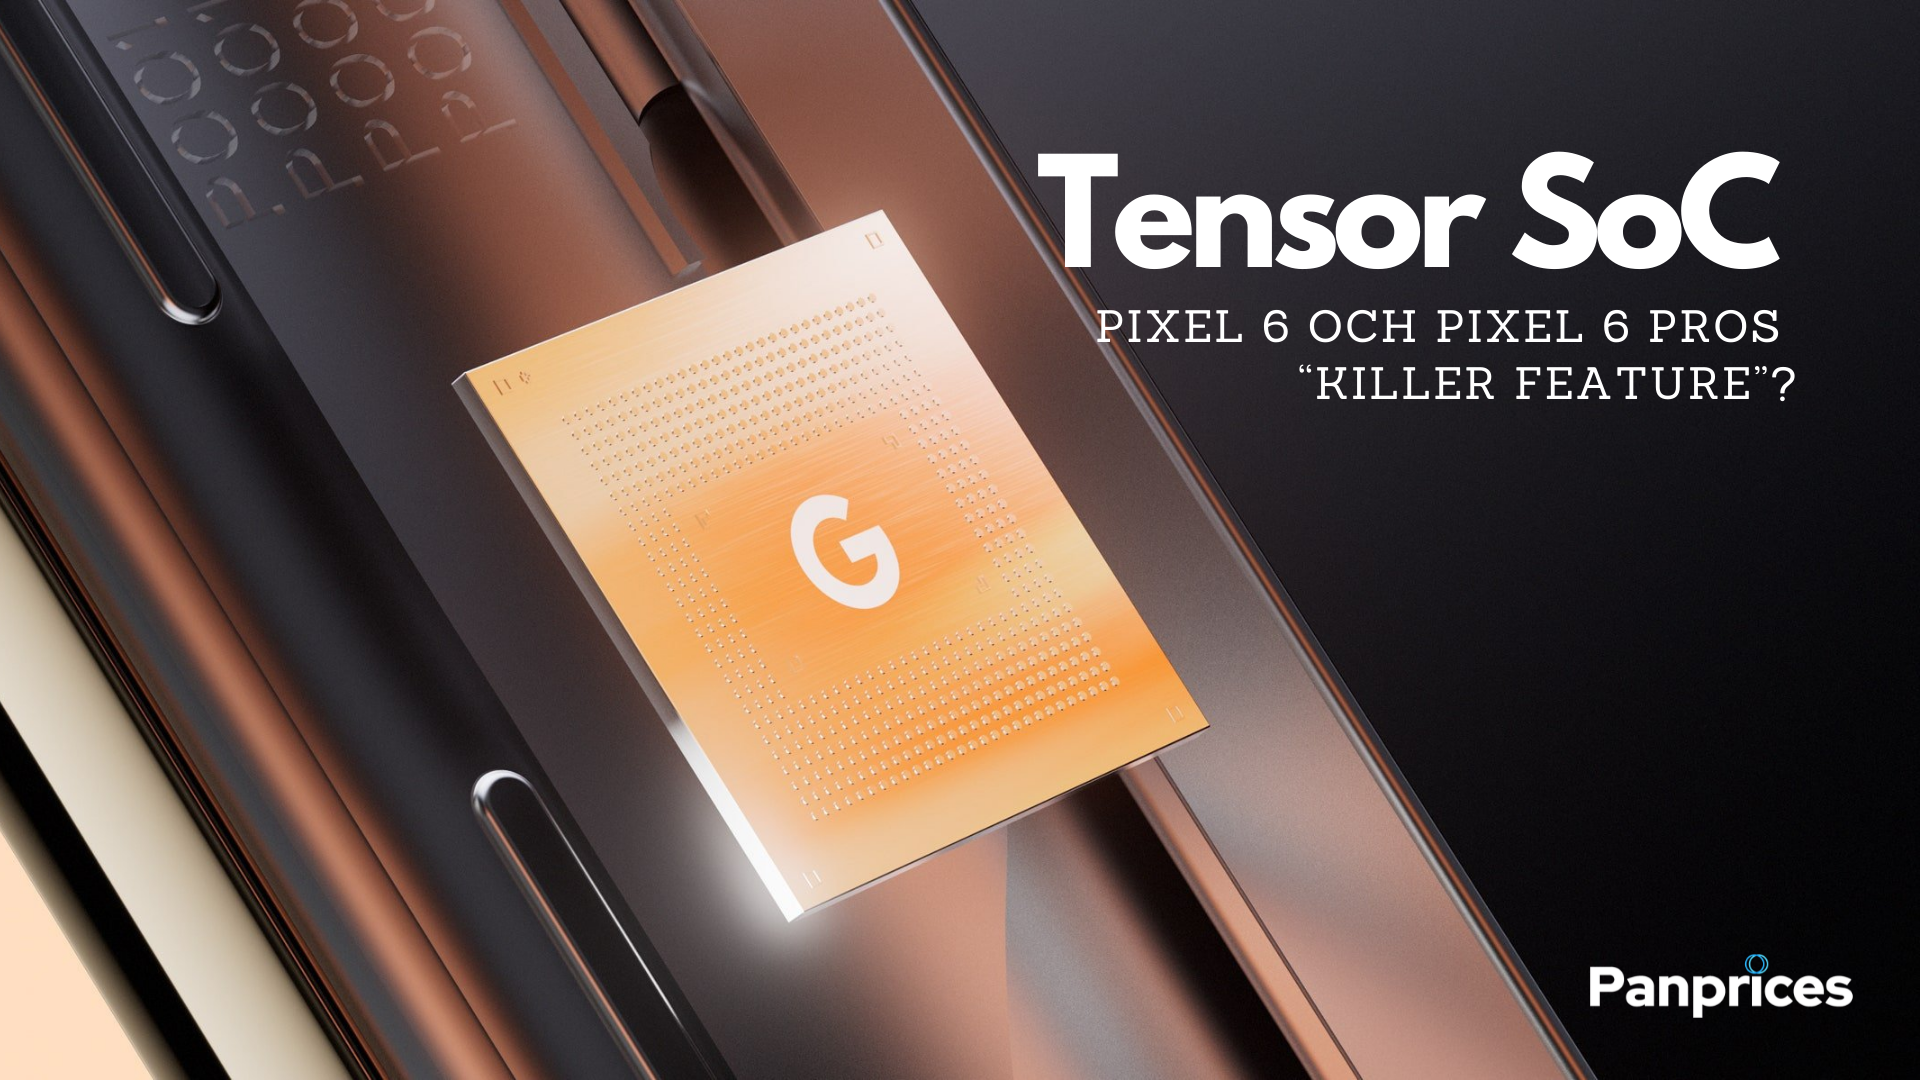 Tensor SoC: The killer feature of Pixel 6 and Pixel 6 Pro?